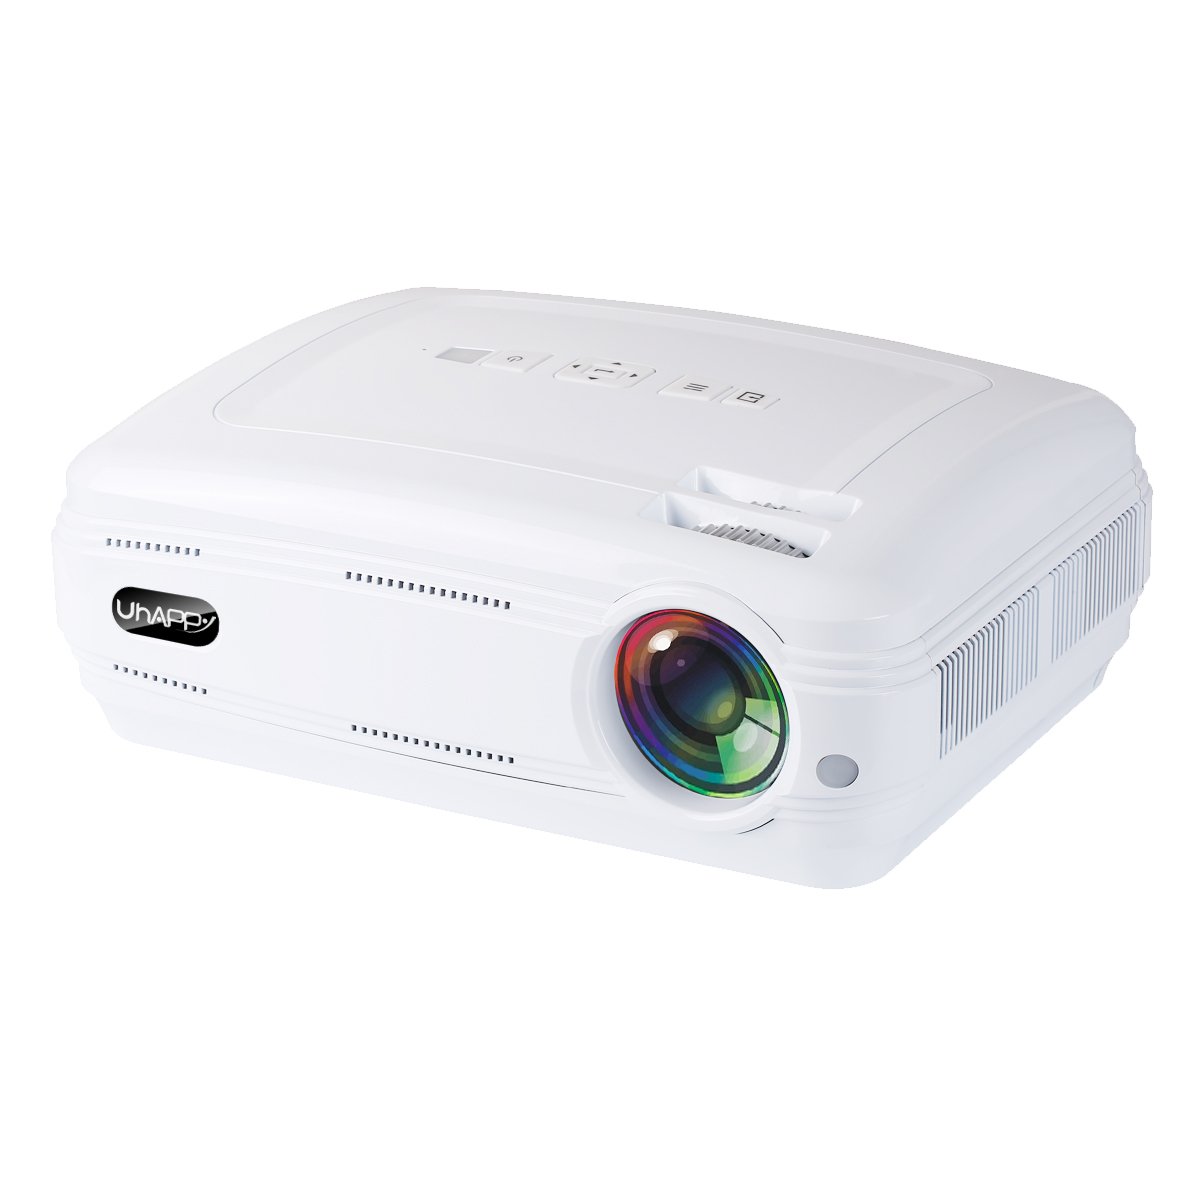 10000 Lumens 3D 1080P Full HD Mini Projector LED Multimedia Home Theater Android 2